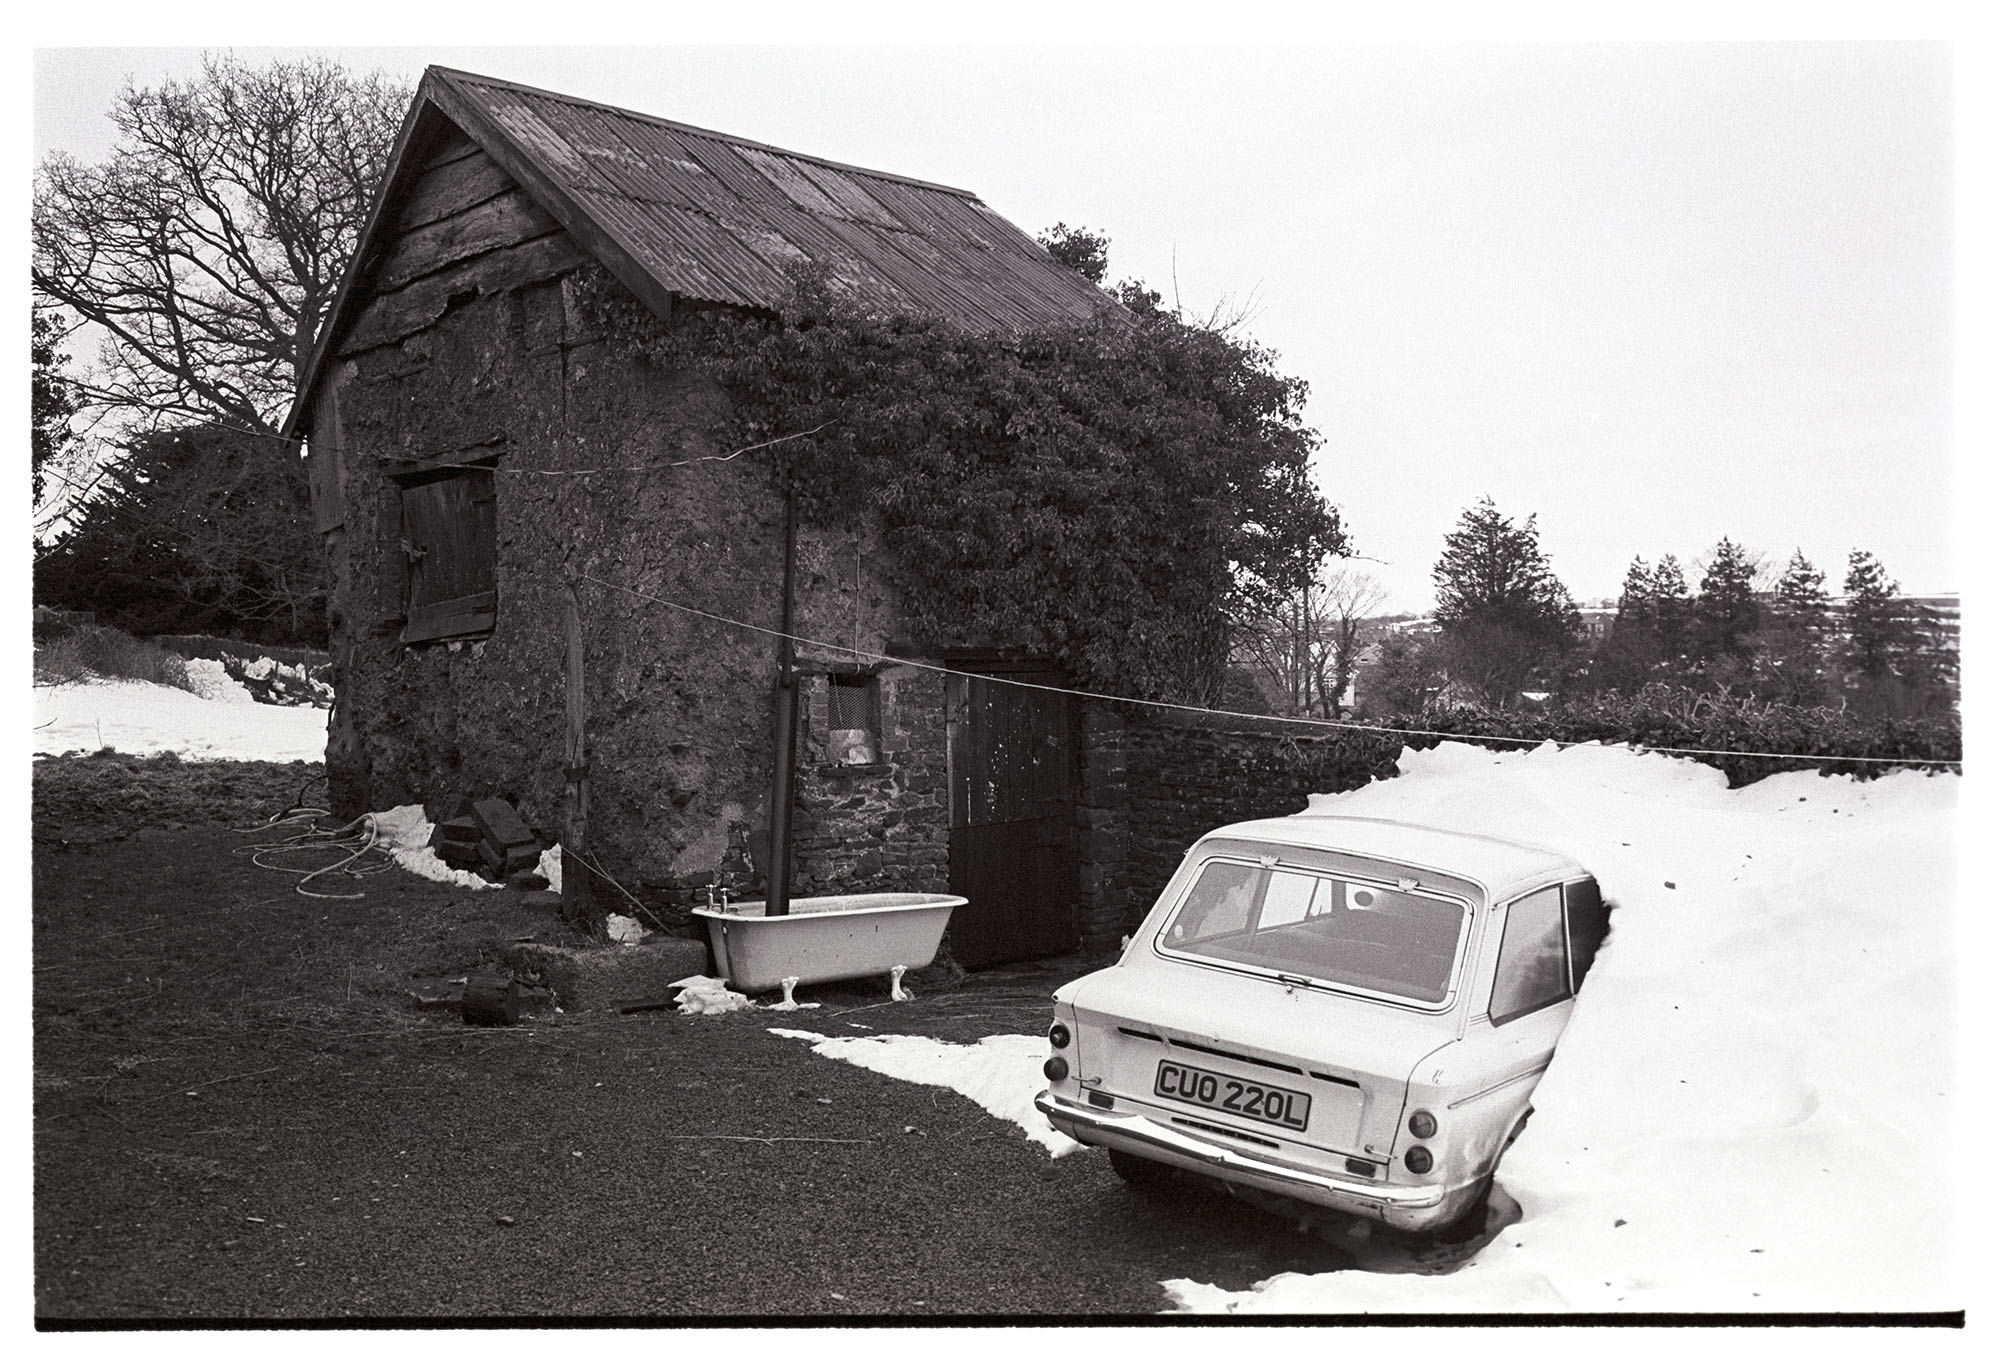 Snow, yard with cob stable barn car in snowdrift, Hillman Imp. <br /> [A Hillman Imp car covered in a snowdrift at North Ham in Dolton. A stone an corrugated iron barn is in the background, with an old bathtub collecting water from a drainpipe.<br /> See the 'Additional notes by James Ravilious field for more information'.]